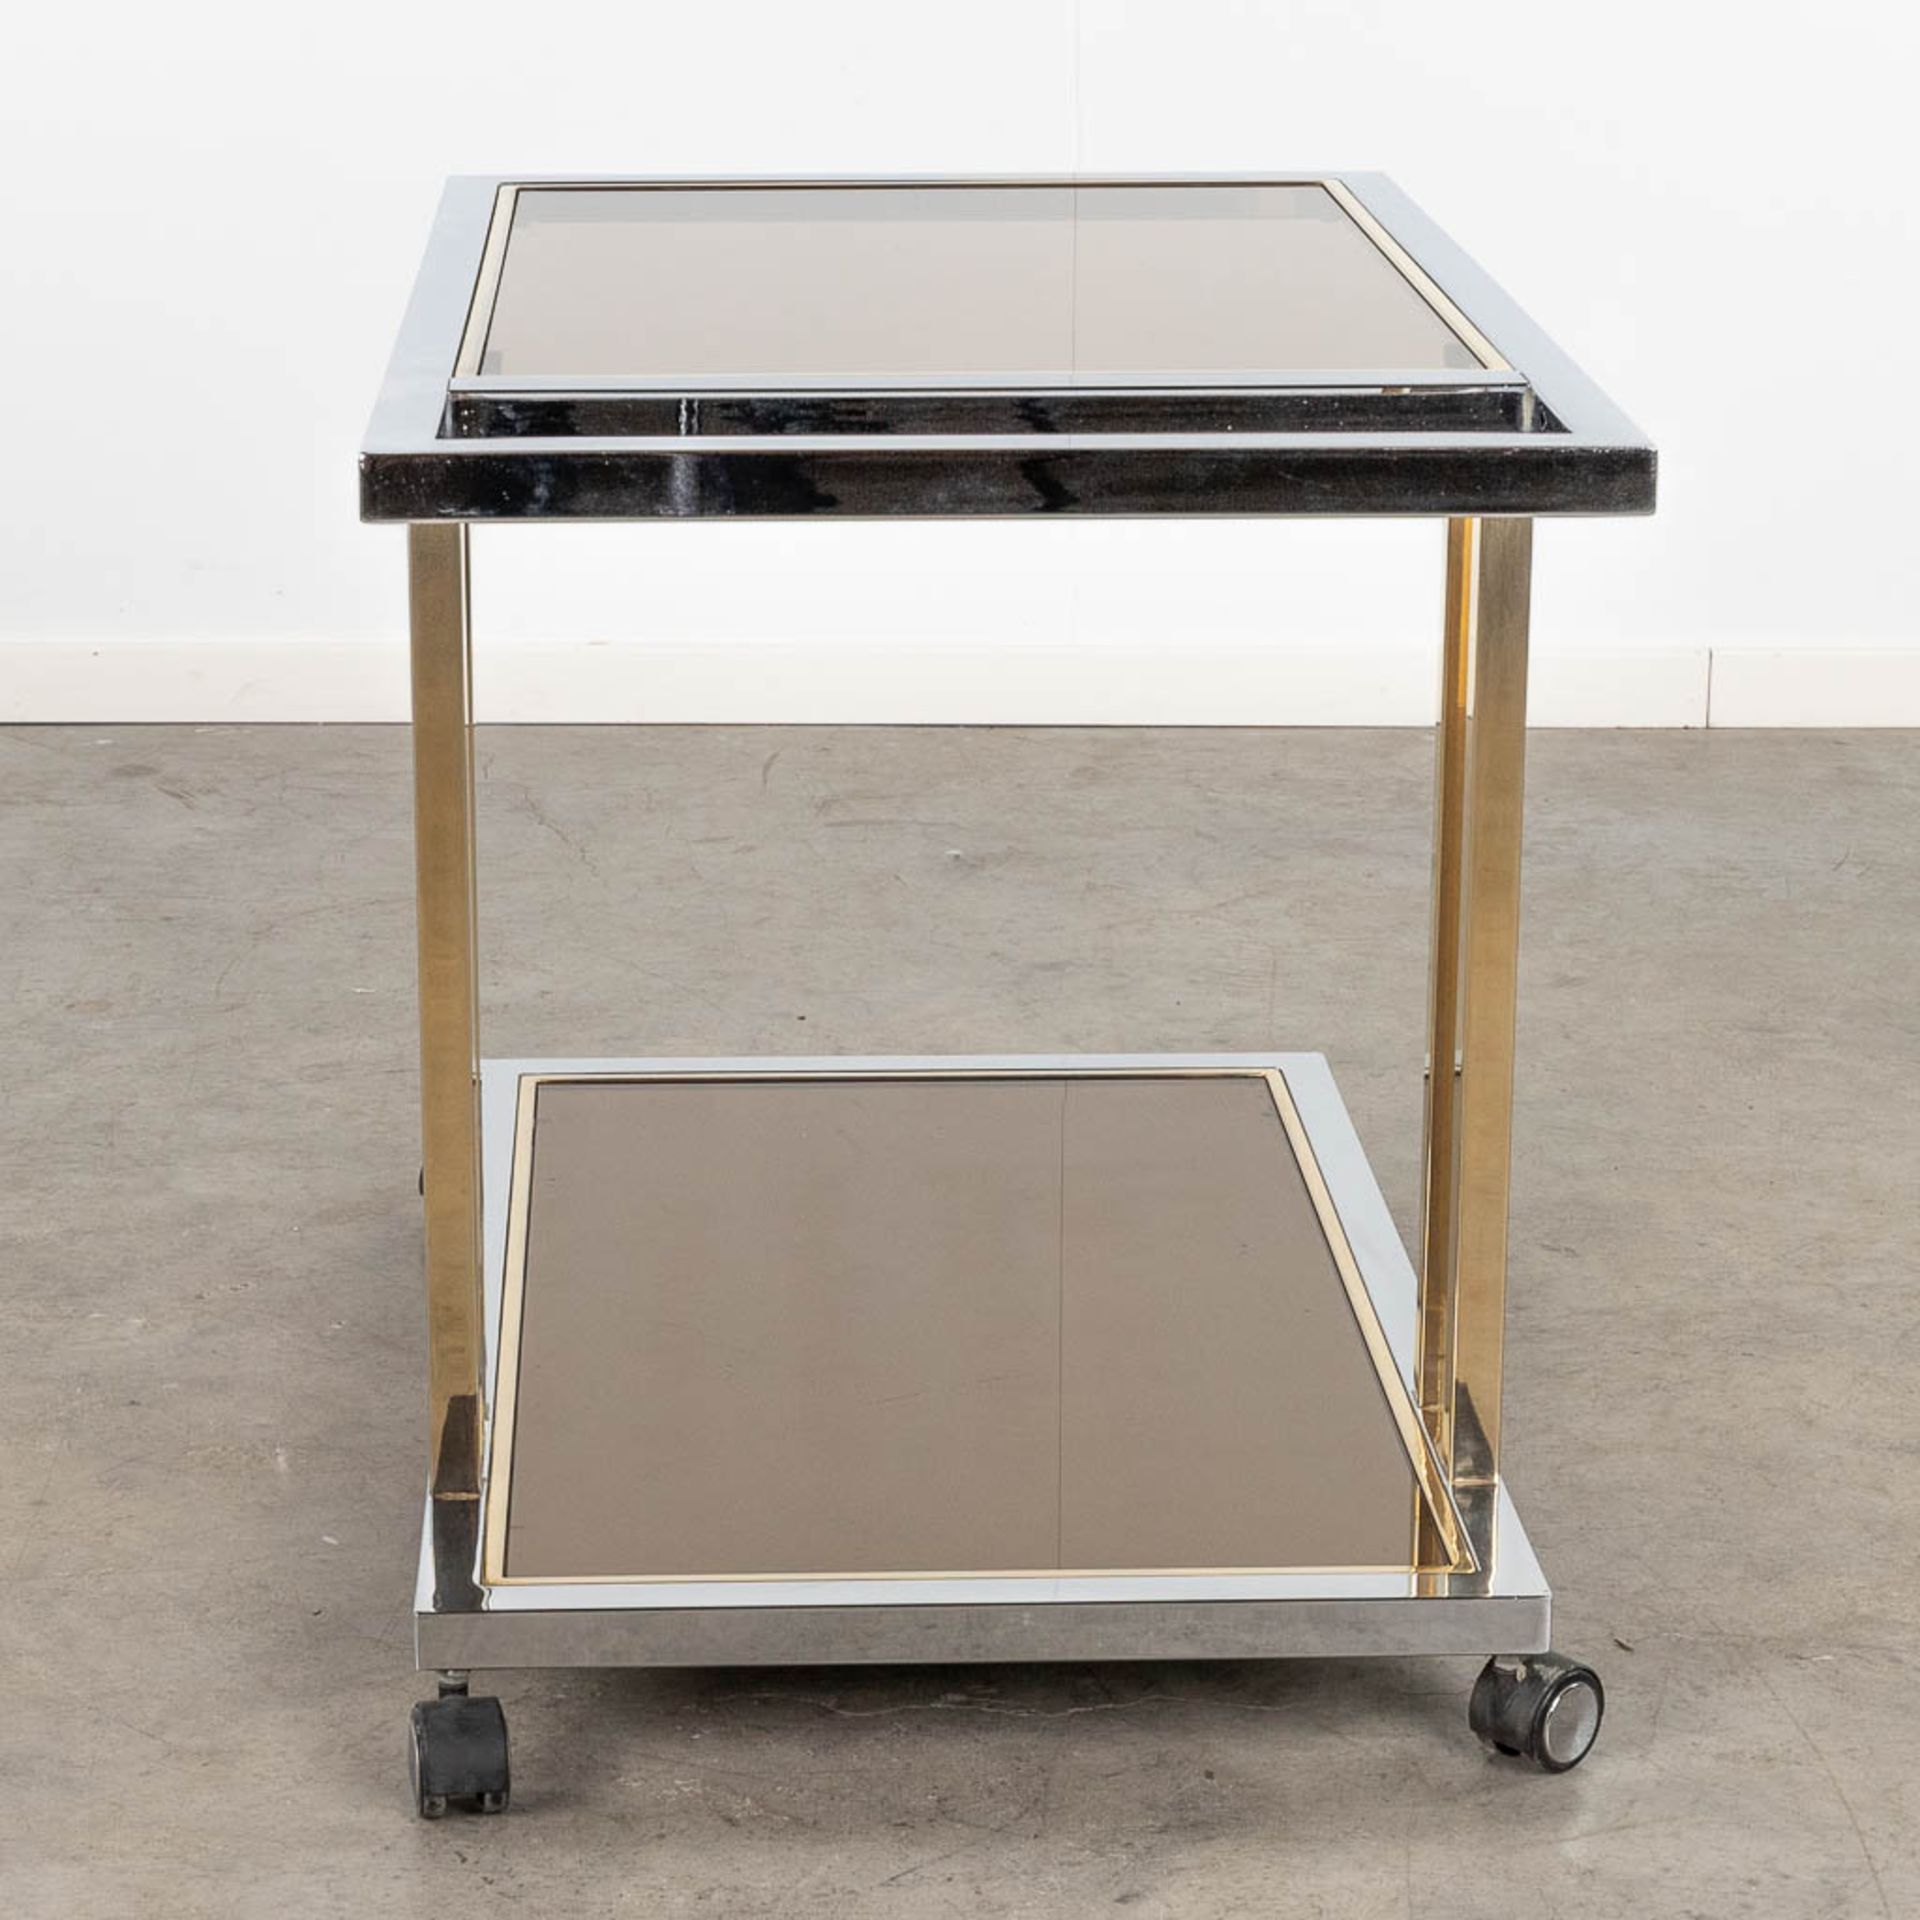 Belgo Chrome, a chromed and gold-plated bar cart. Circa 1980. (L: 53 x W: 100 x H: 67 cm) - Image 6 of 10